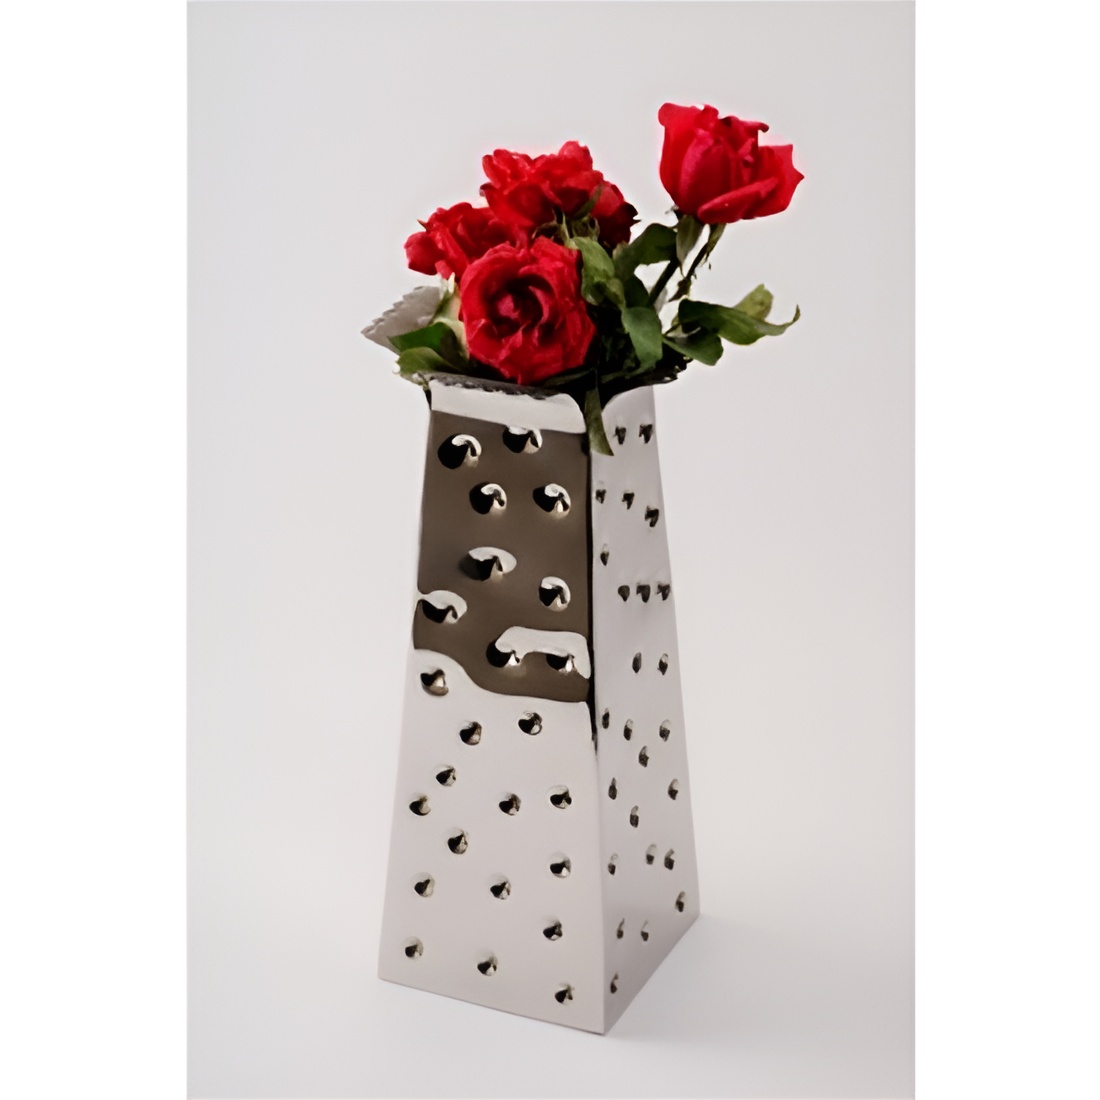 A Dimple Flower Vase is a unique and aesthetically pleasing vase designed to display flowers and enhance the beauty of floral arrangements. As the name suggests, it typically features a distinctive dimpled or textured surface that adds a touch of elegance and style to the vase.